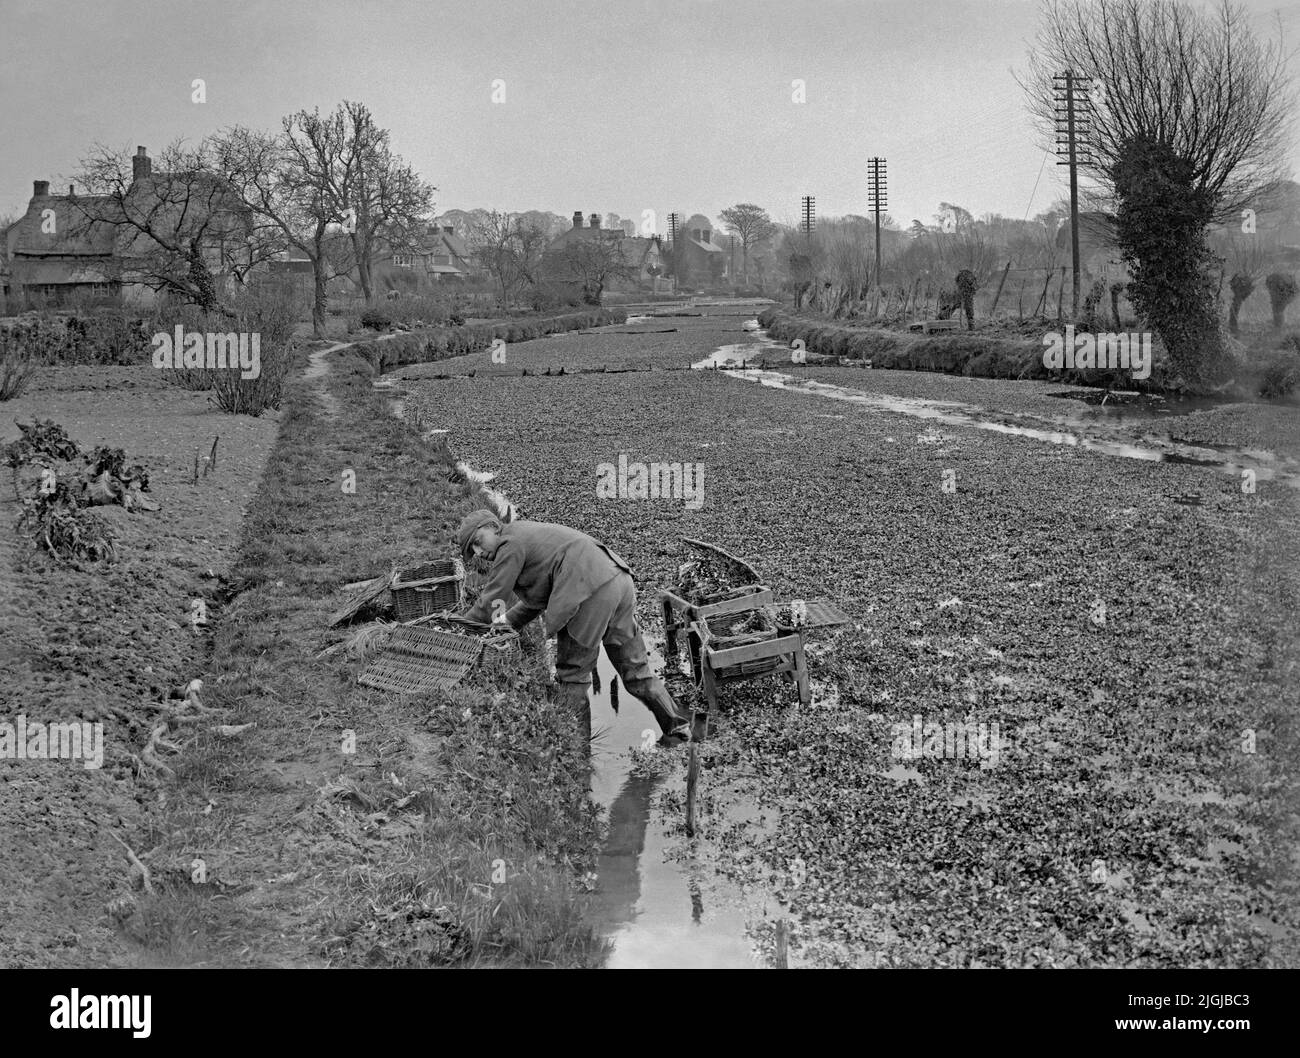 A man harvesting watercress at the beds in the chalk stream at Ewelme in the Chiltern Hills, South Oxfordshire, England, UK c. 1930. He wears long, rubber waders and is carefully filling wicker baskets with the salad vegetable. The village was the hub of the British watercress industry in the 20th century. Stricter regulations meant the sale of watercress from the Ewelme site ended in 1988 – a vintage 1920s/30s photograph. Stock Photo